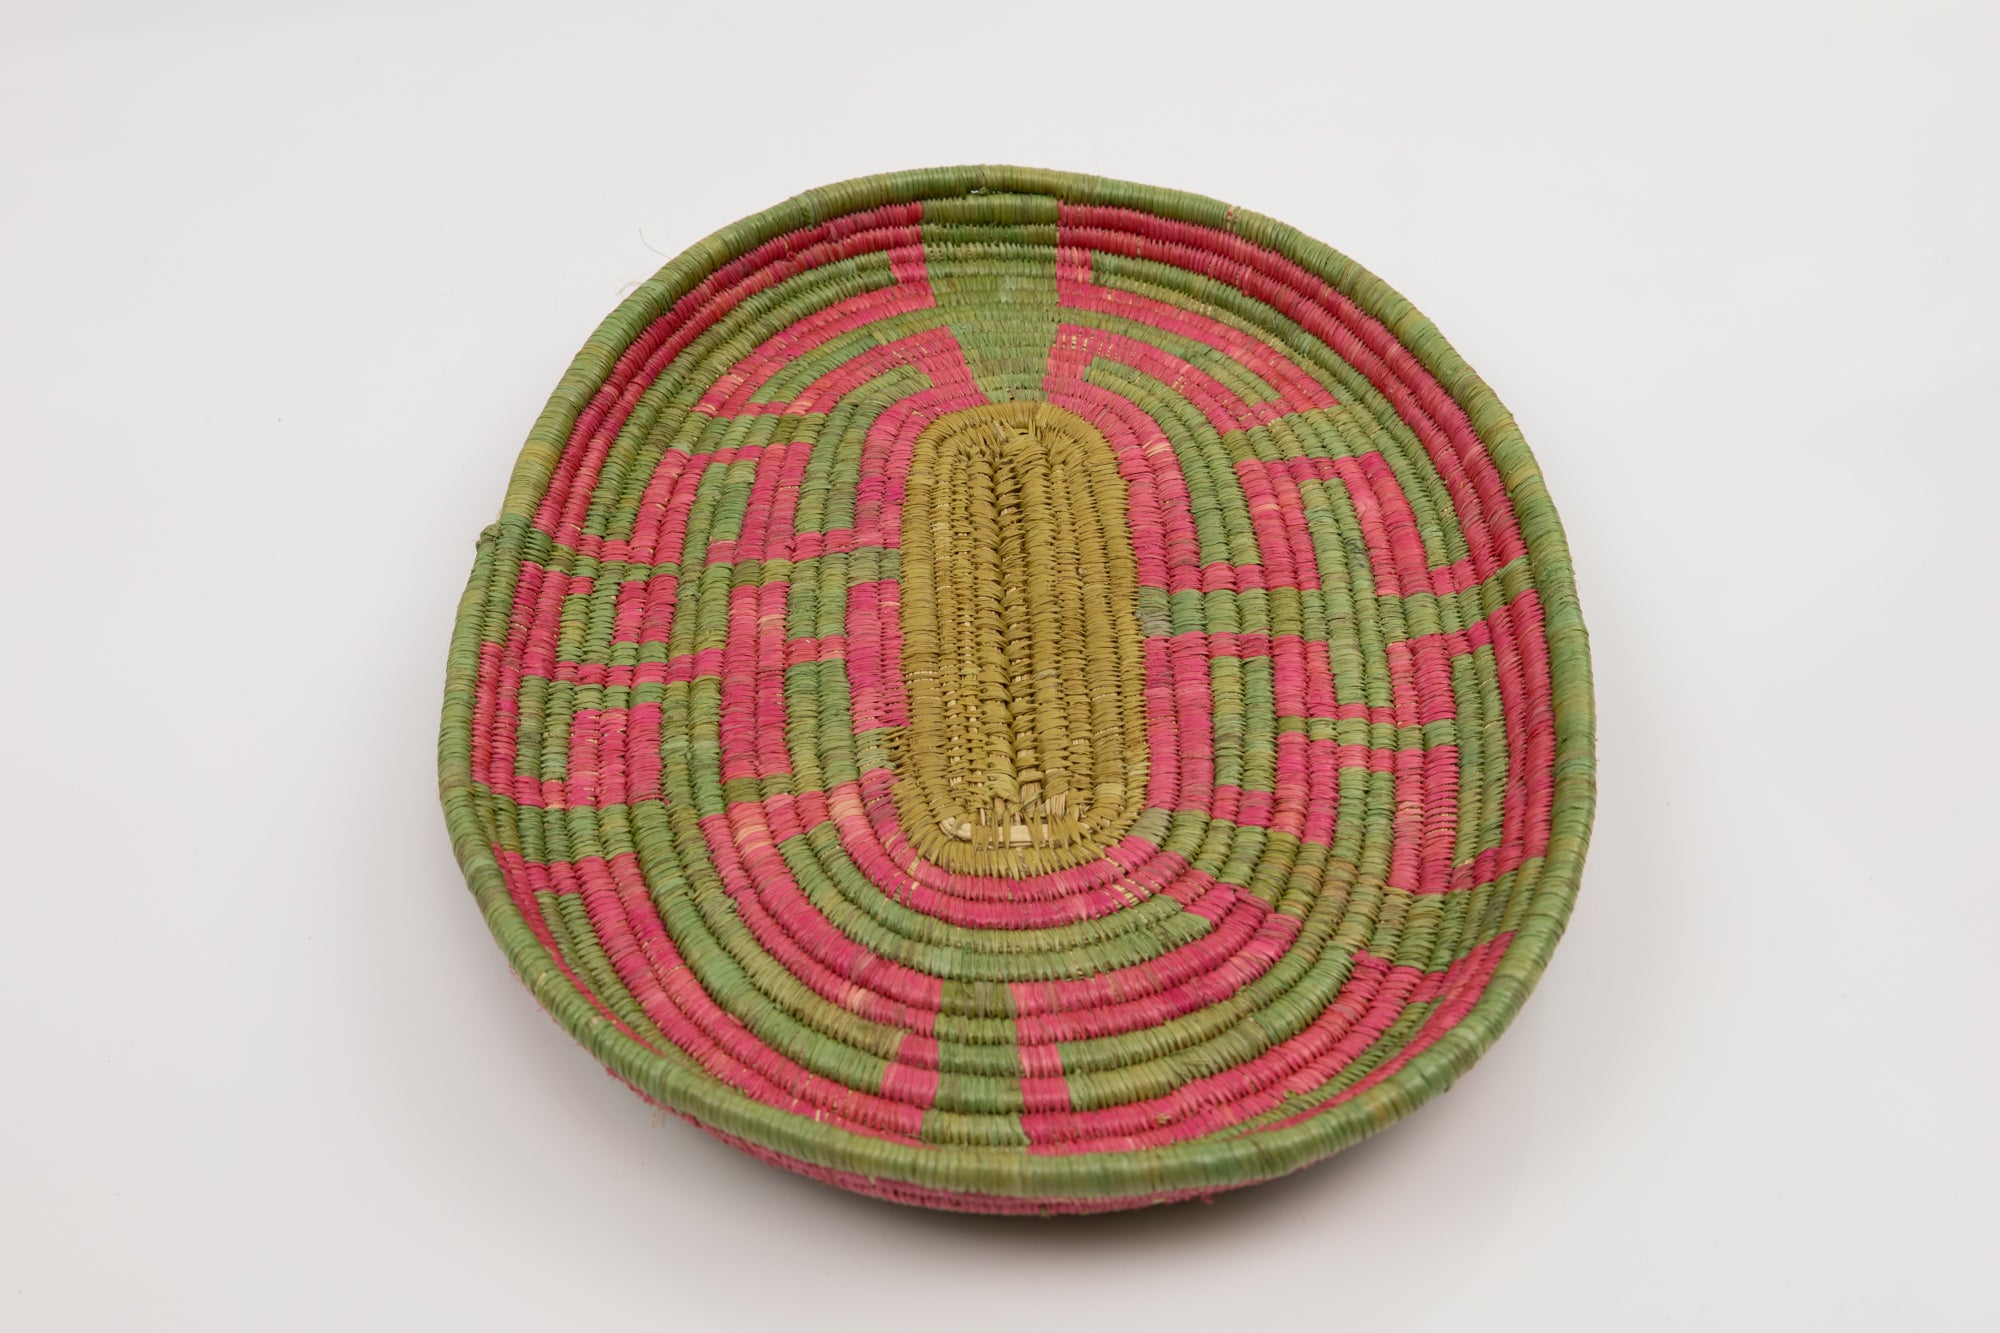 Hand Woven Vintage Plate Basket Made By Indigenous Artisans